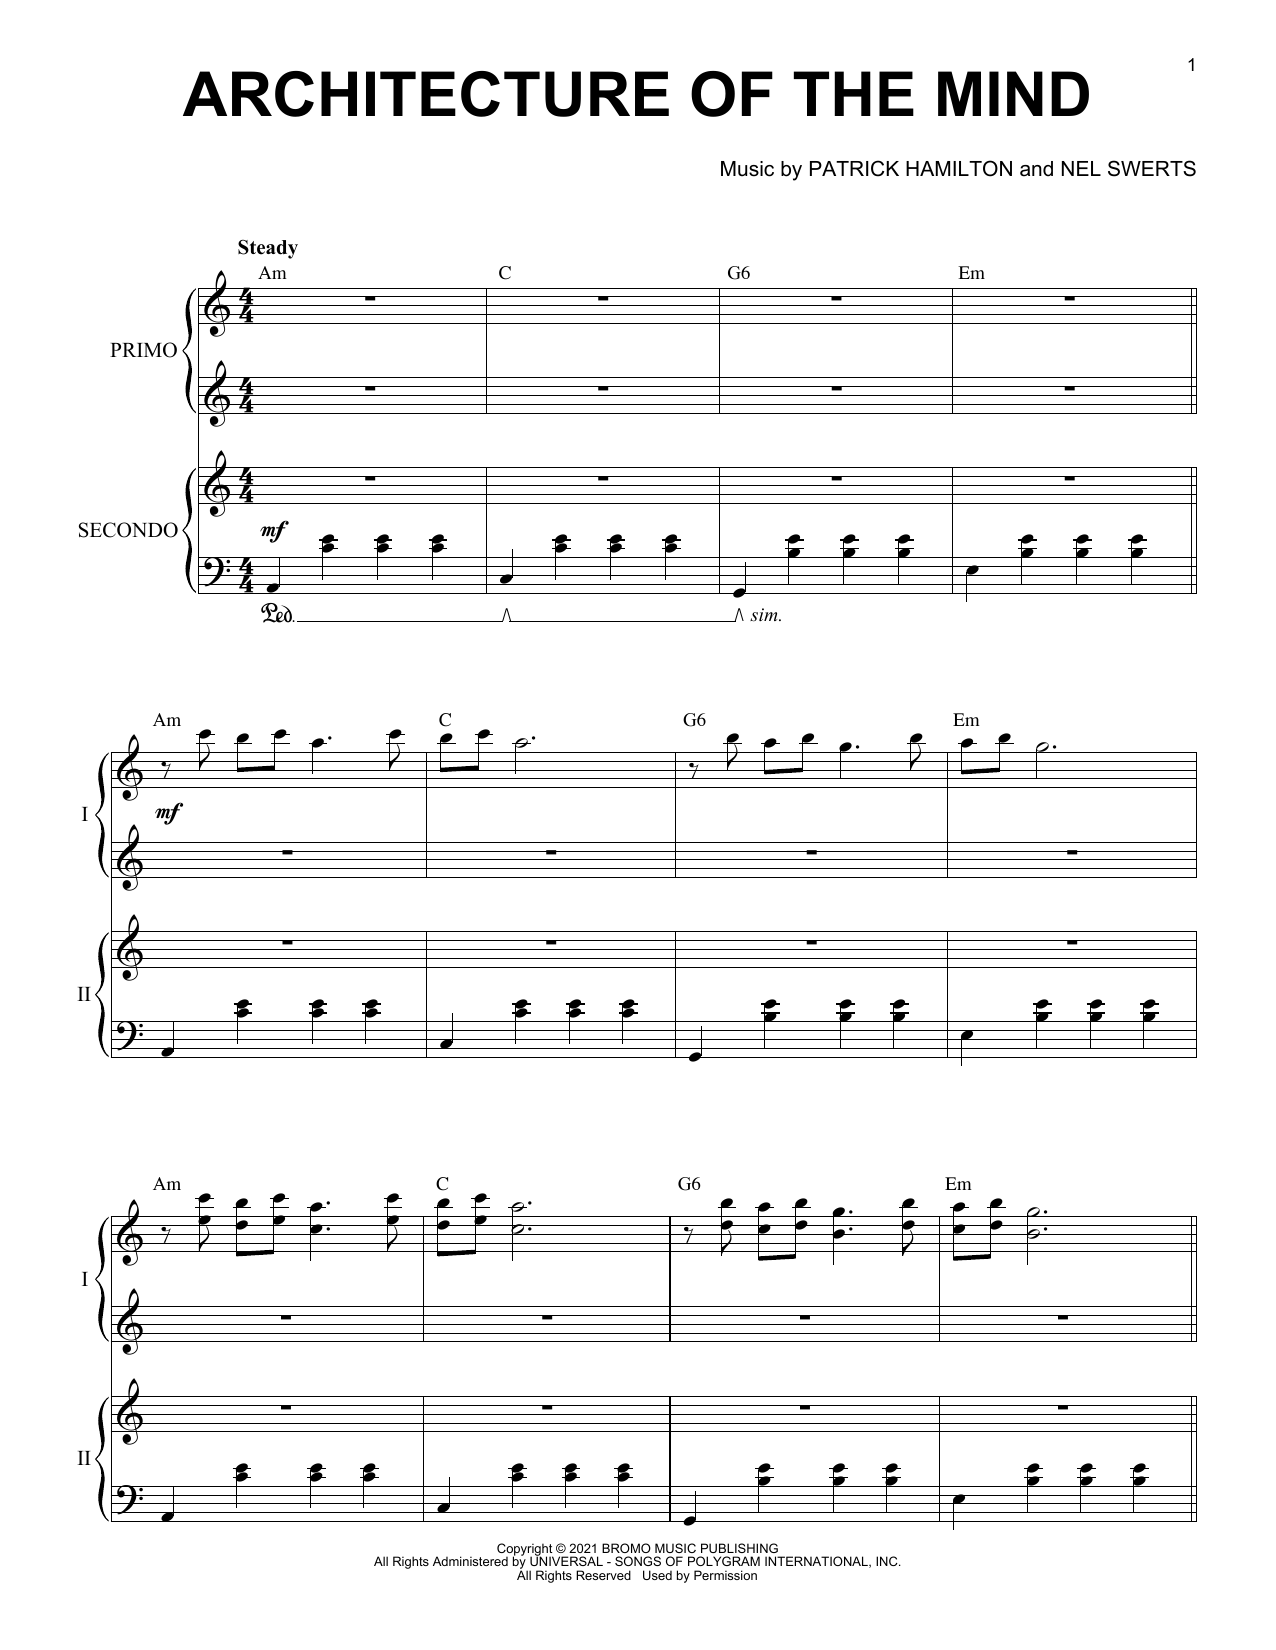 Download Patrick Hamilton & Nel Swerts Architecture of the Mind Sheet Music